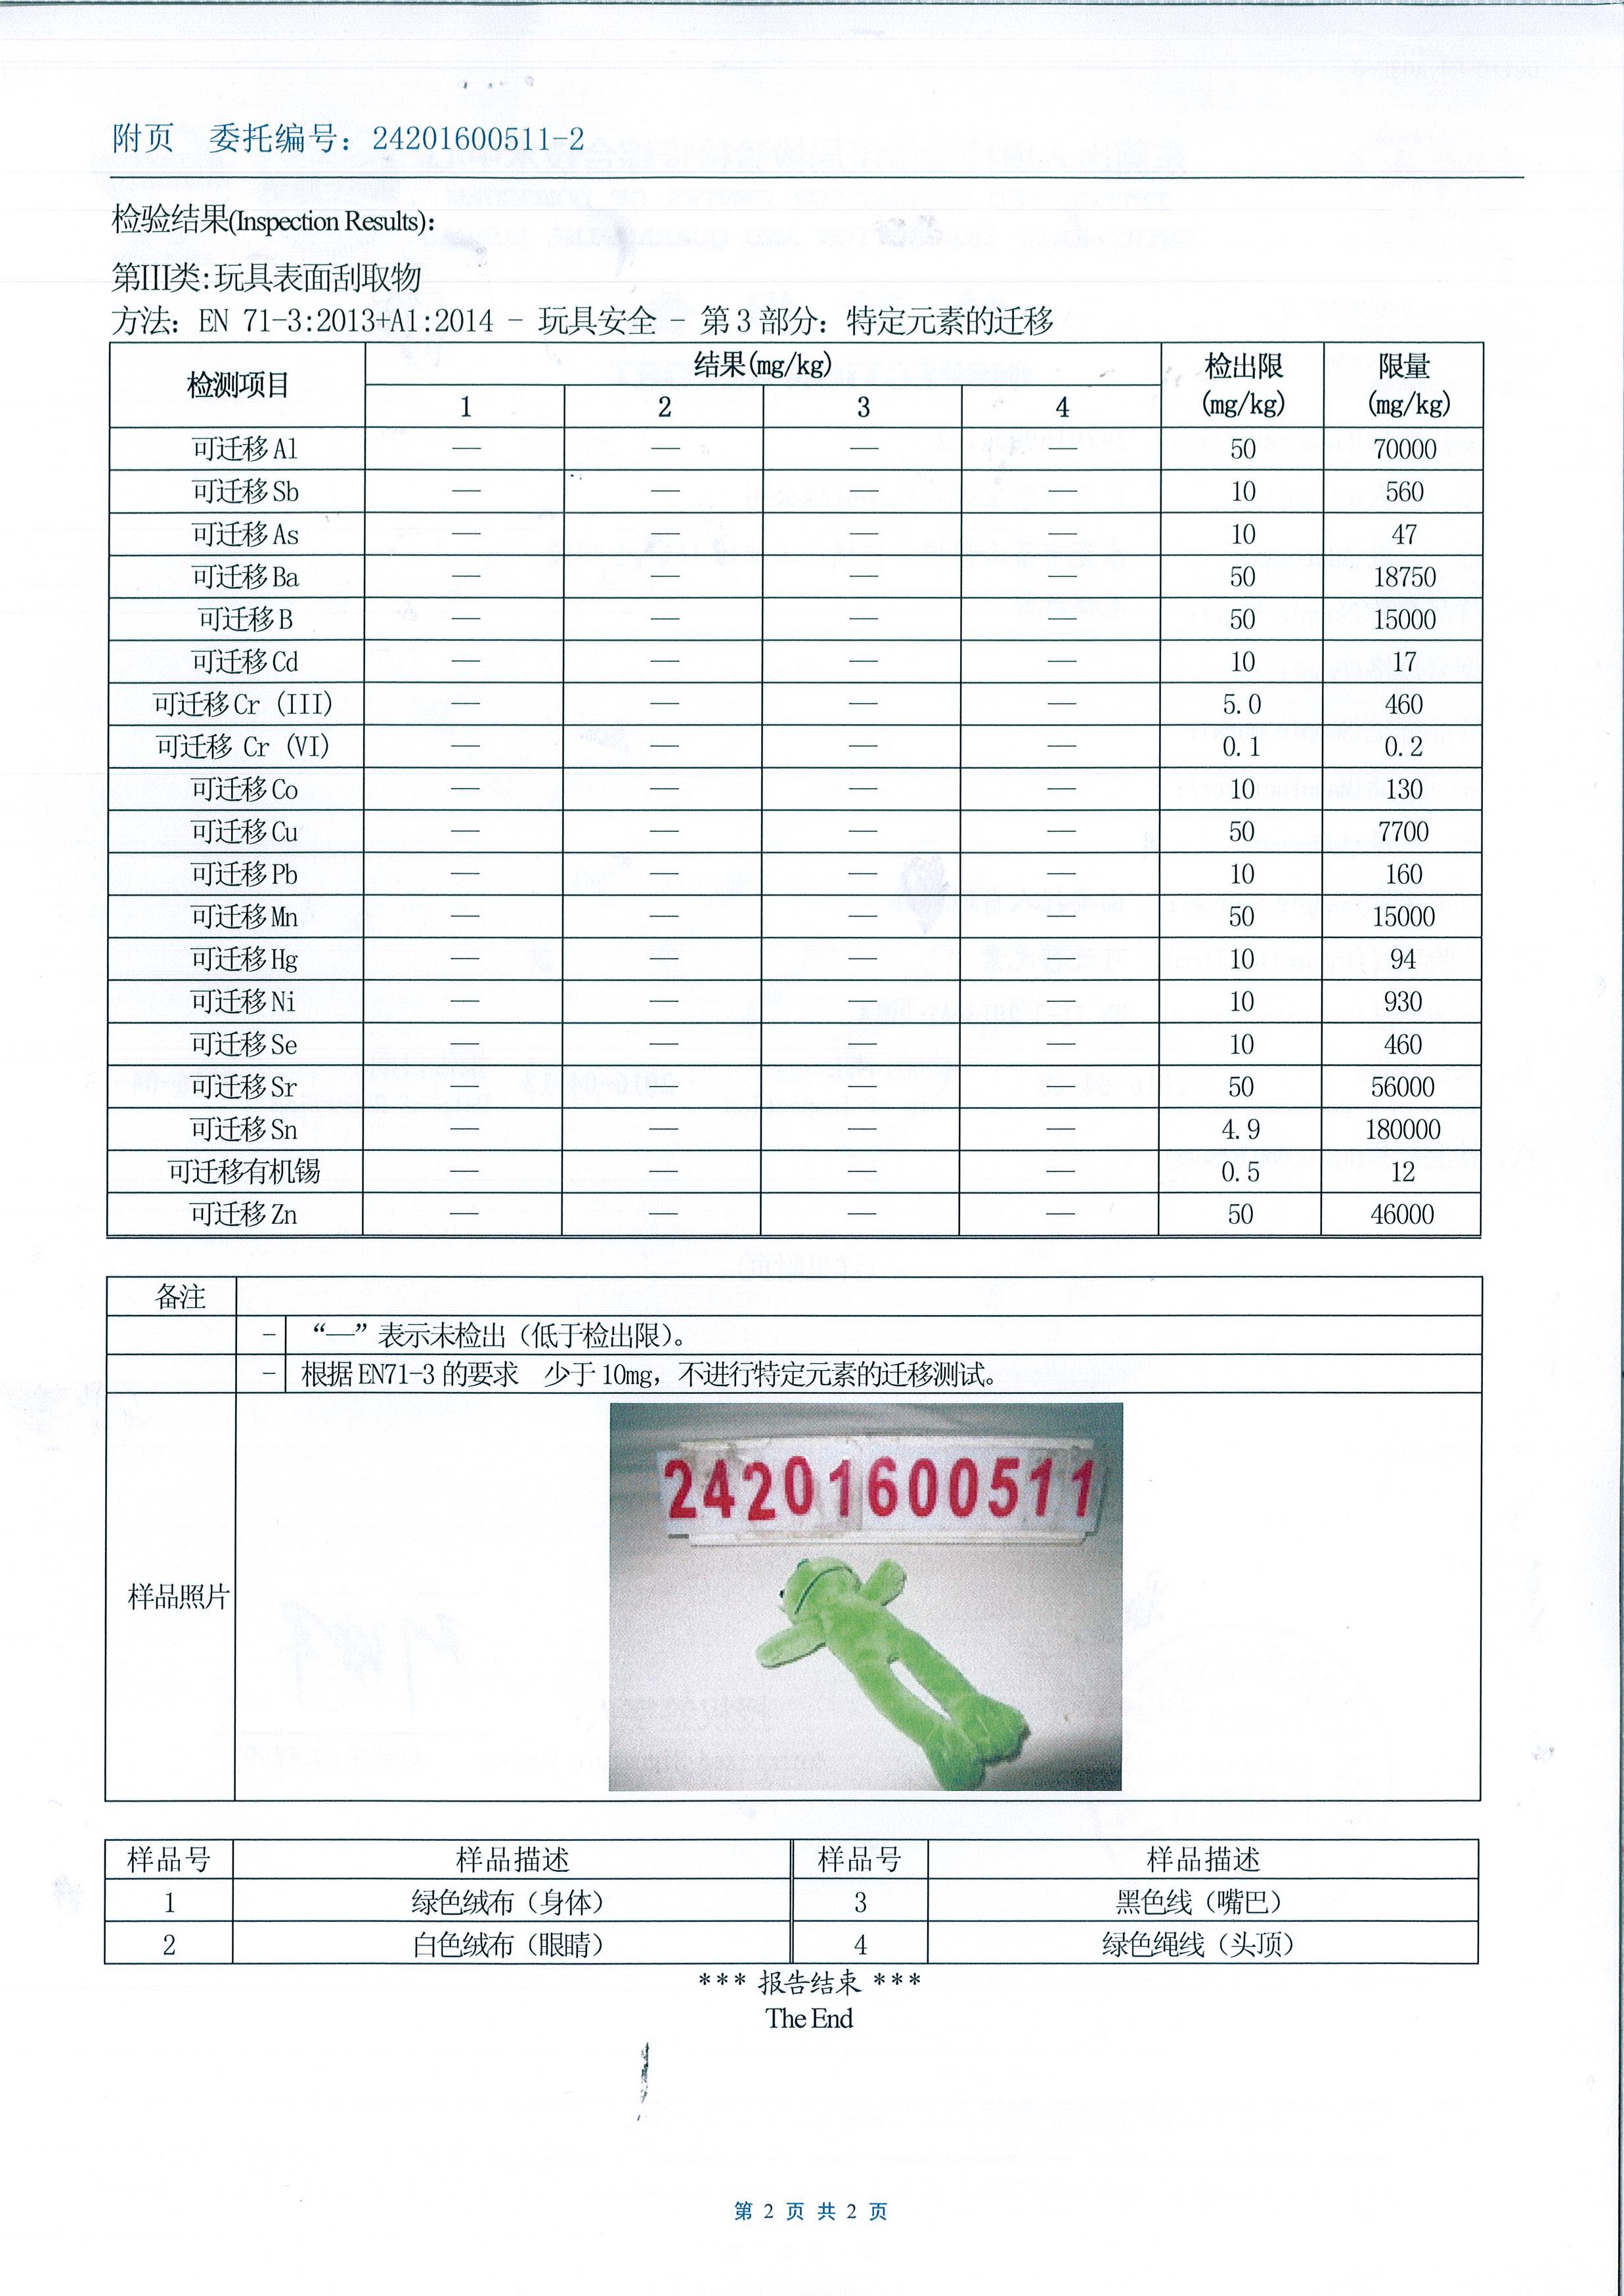 PRODUCT INSPECTION REPORT OF PAOLIDE TOY  EN71